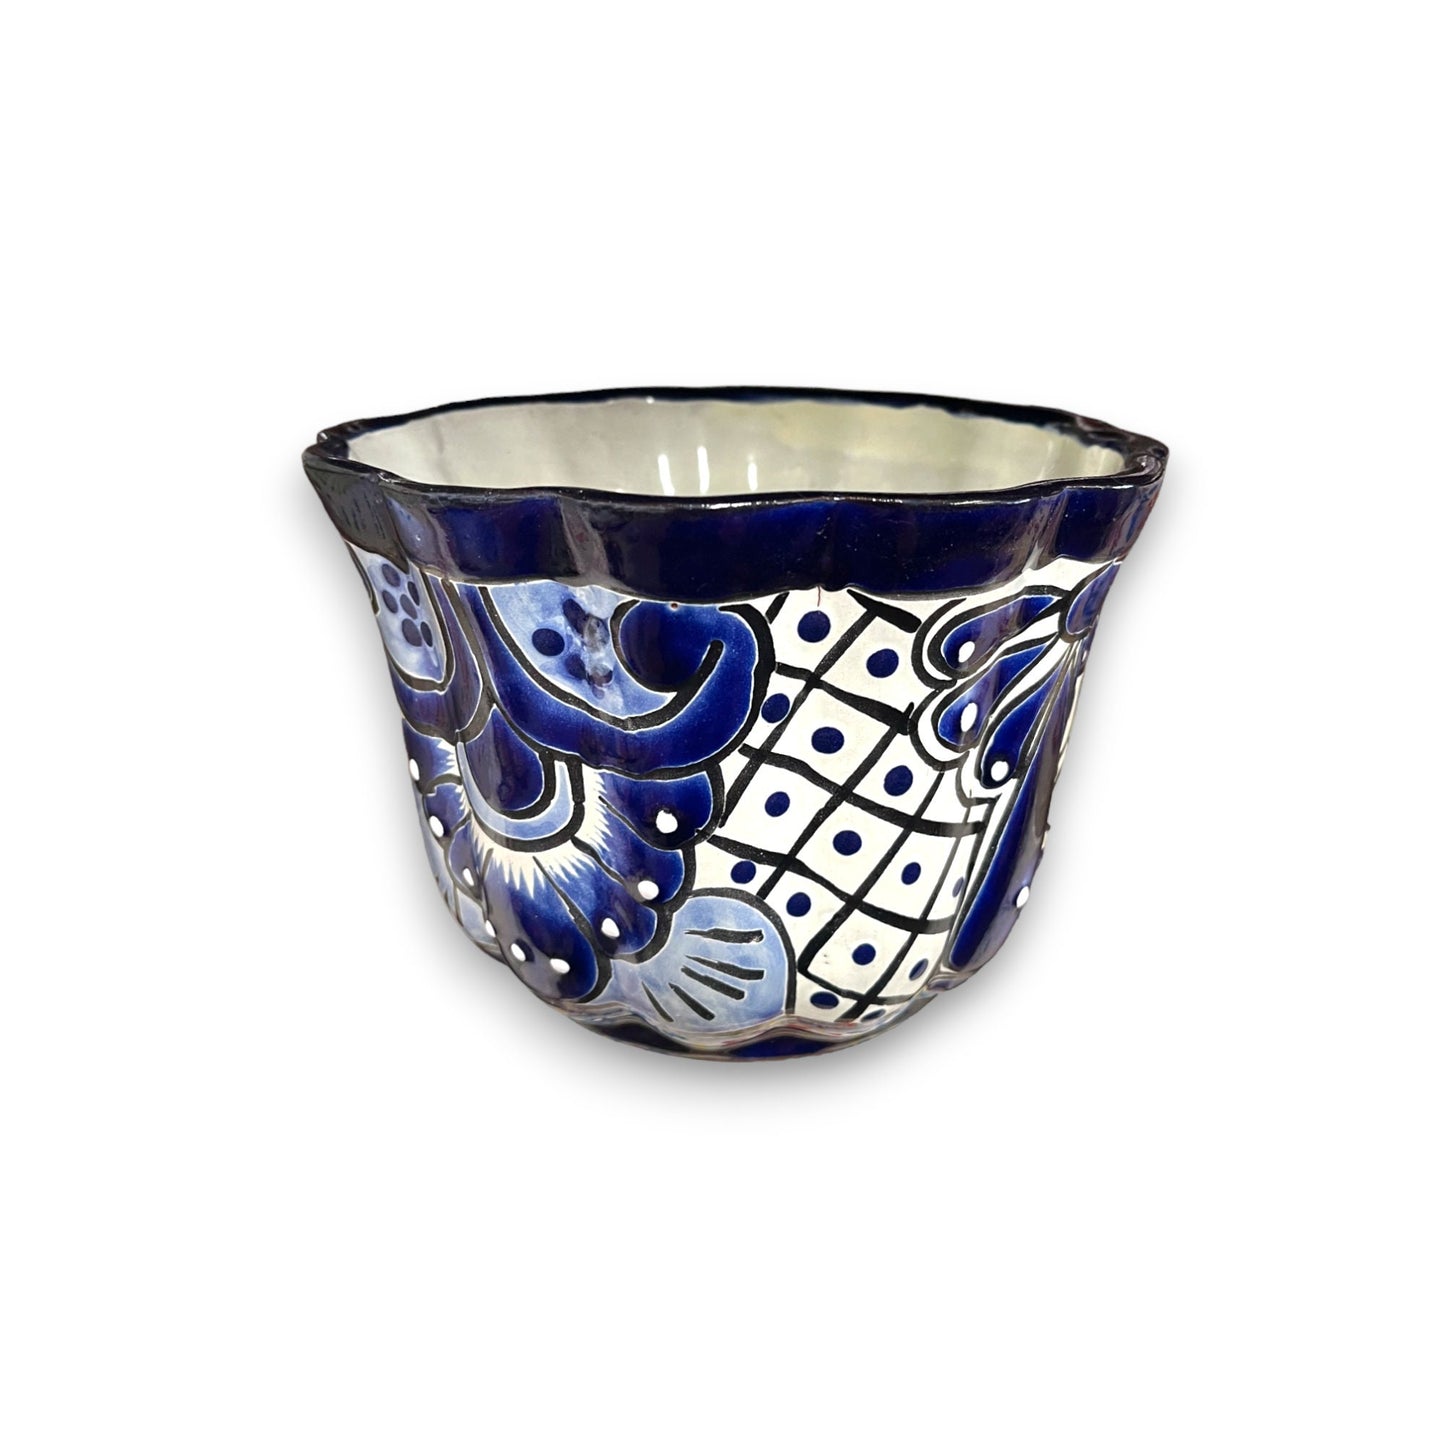 Handcrafted Talavera Ceramic Planter | Colorful Blue & White Mexican Pottery